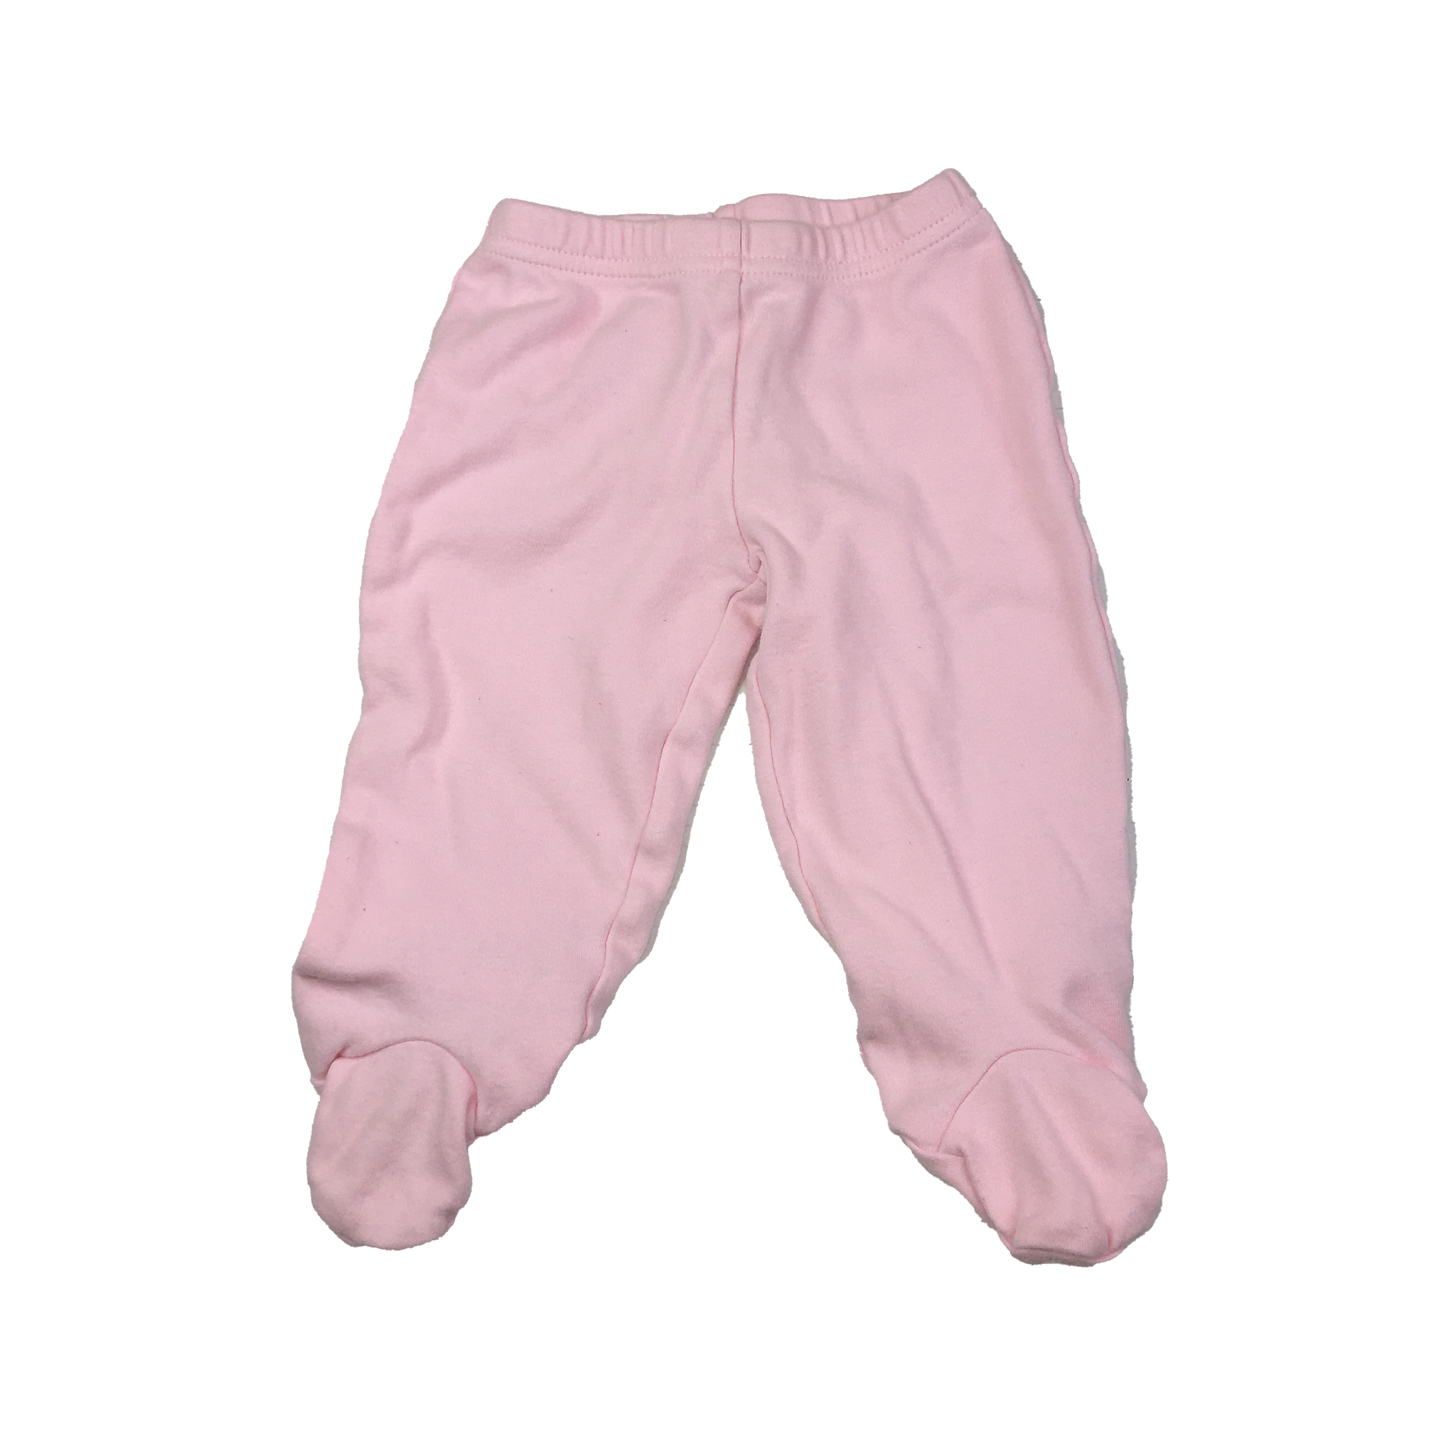 Child of Mine Pink Footed Pull-On Pants 3-6M